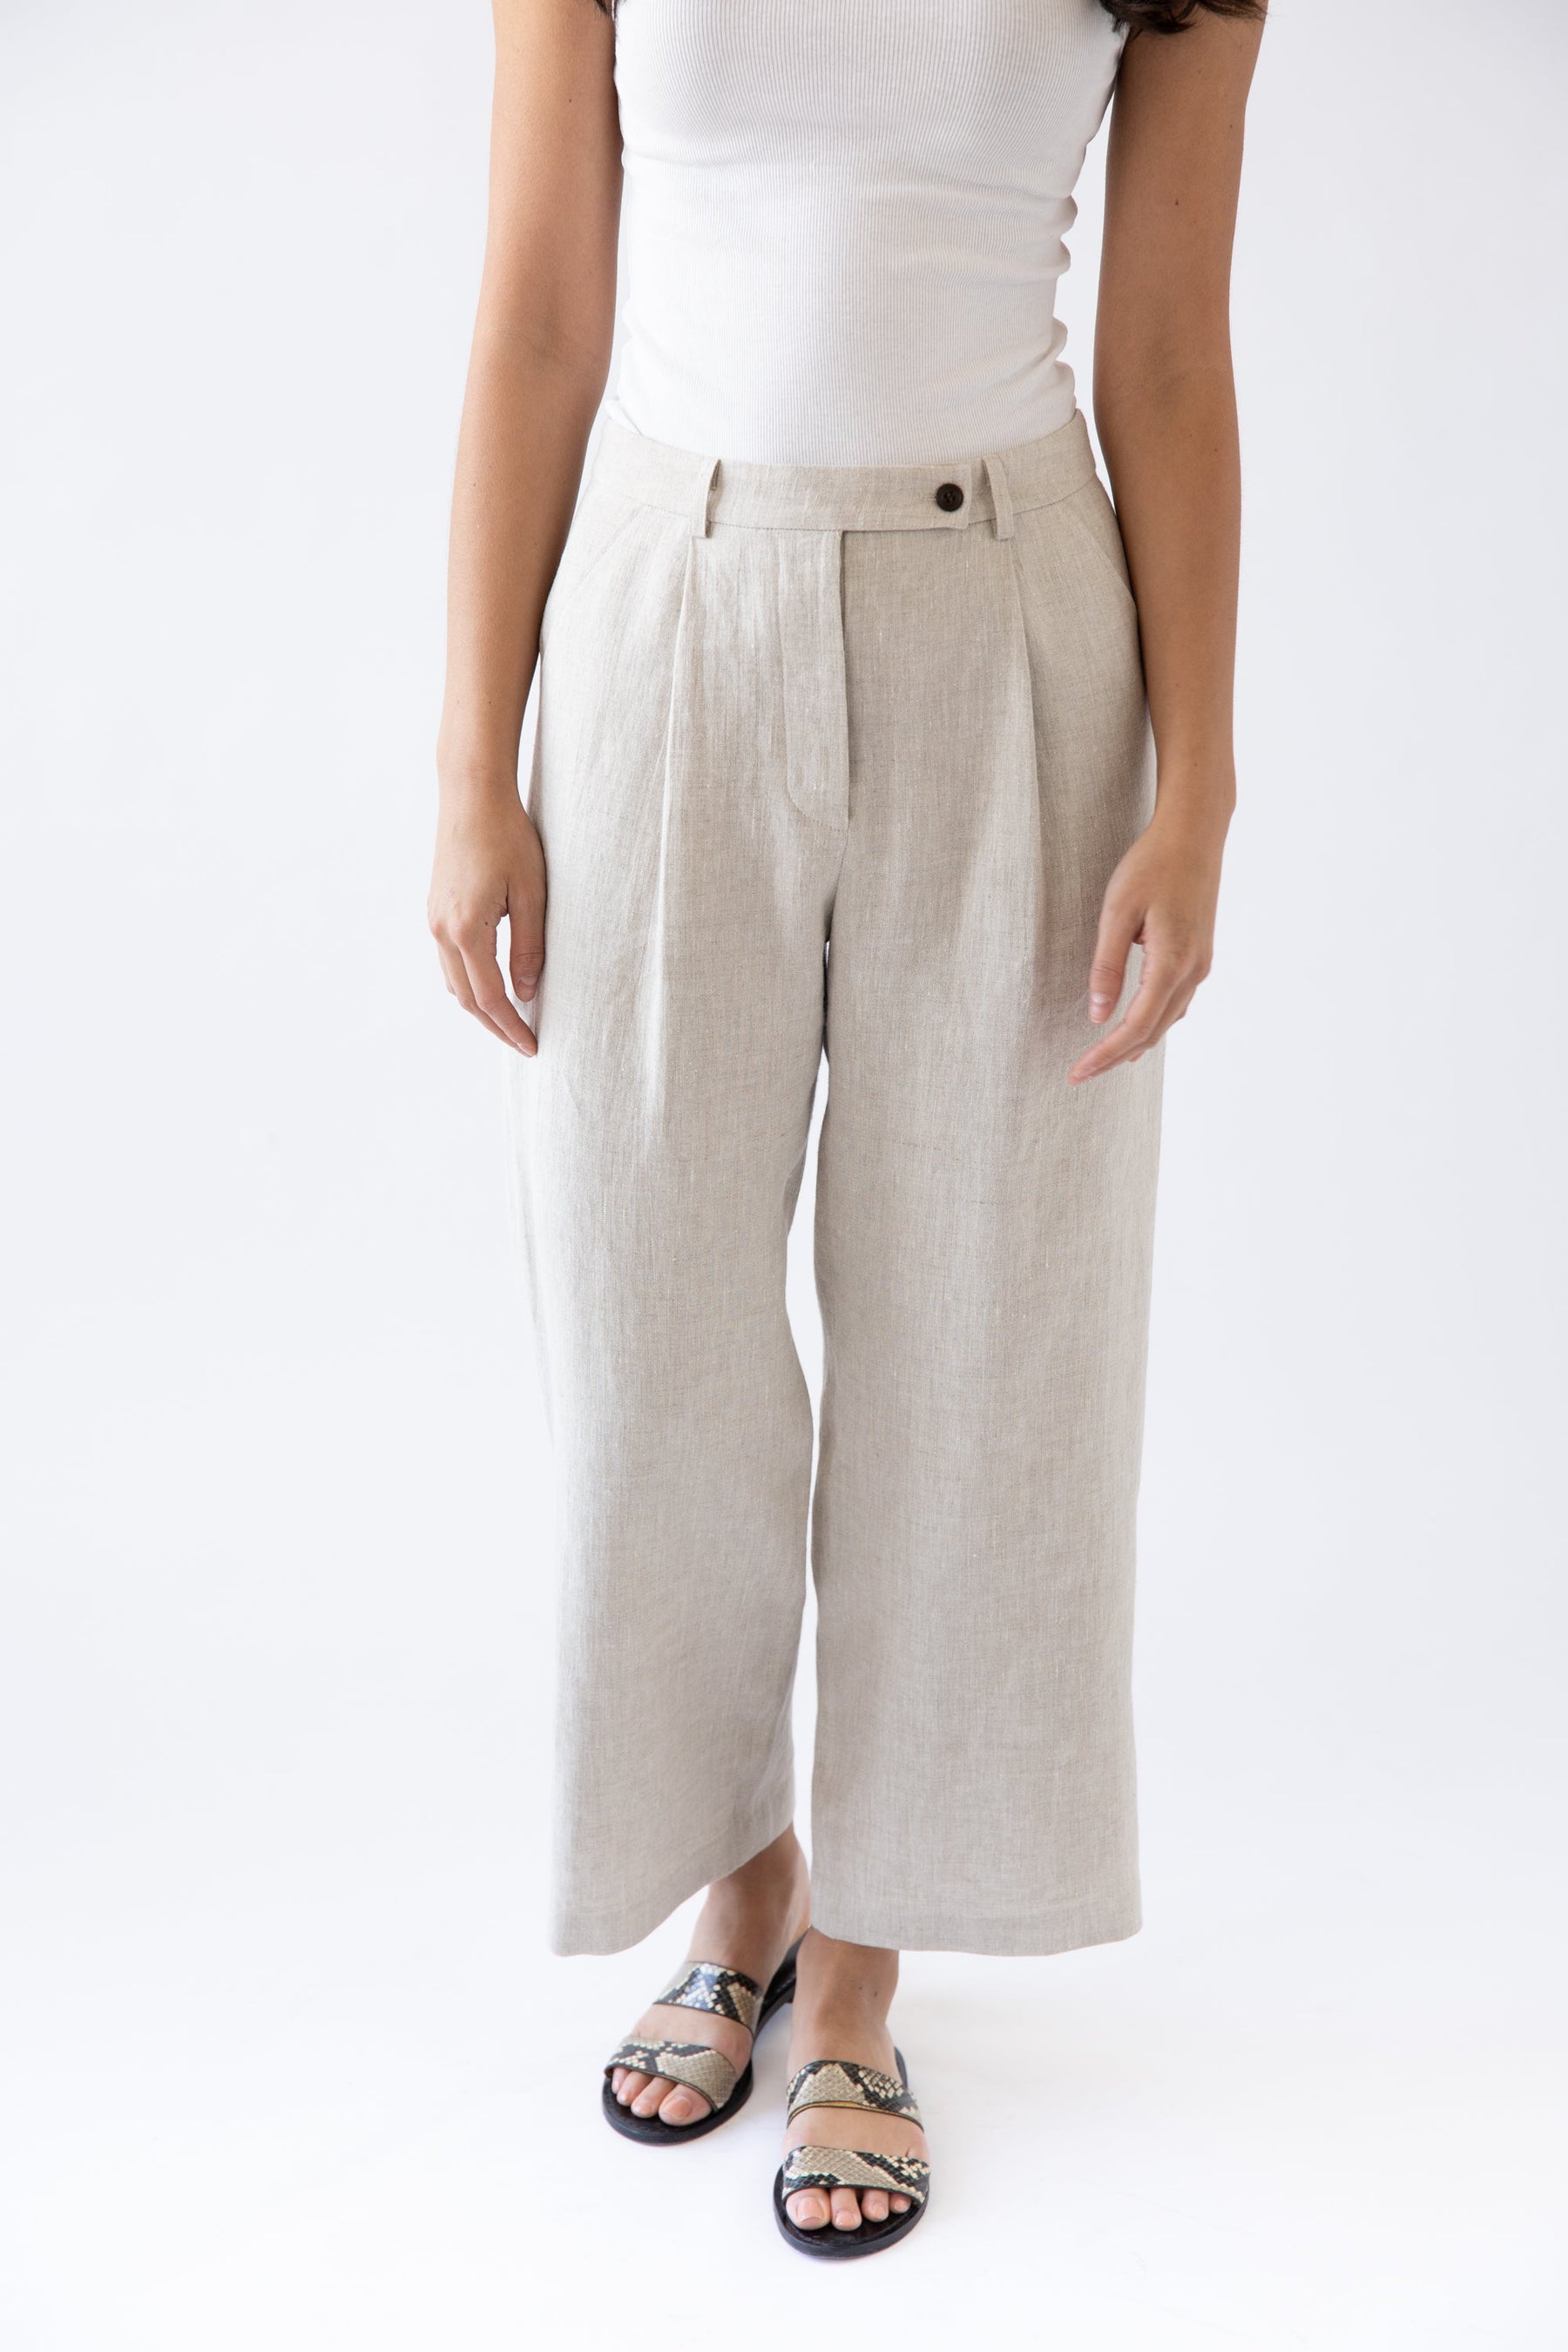 quiet luxury linen trousers for summer